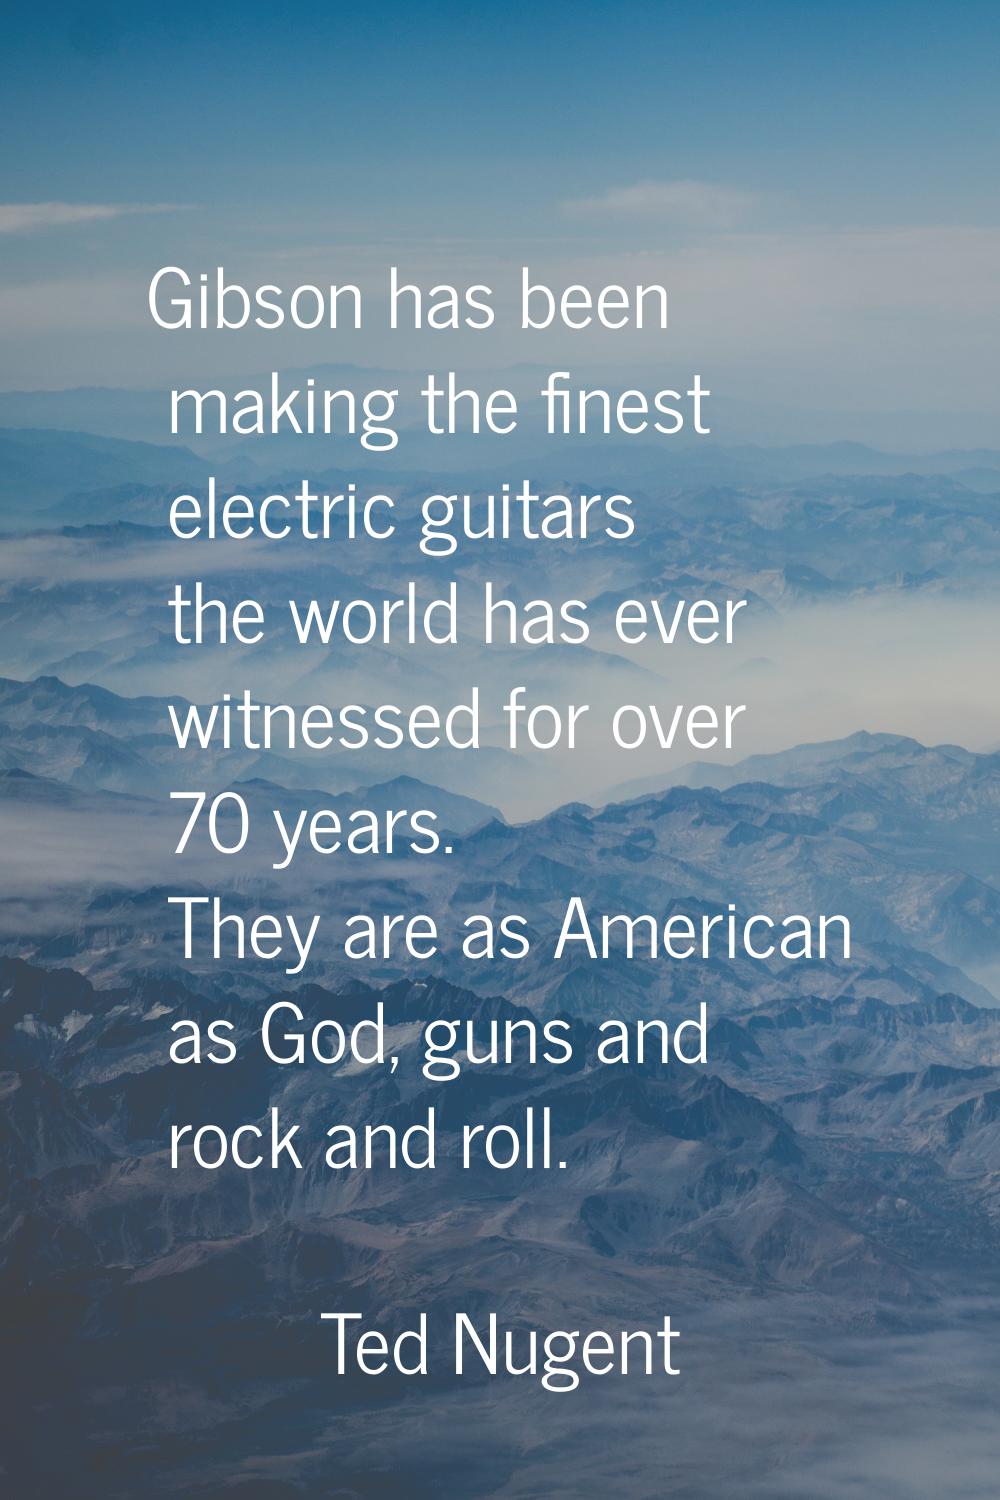 Gibson has been making the finest electric guitars the world has ever witnessed for over 70 years. 